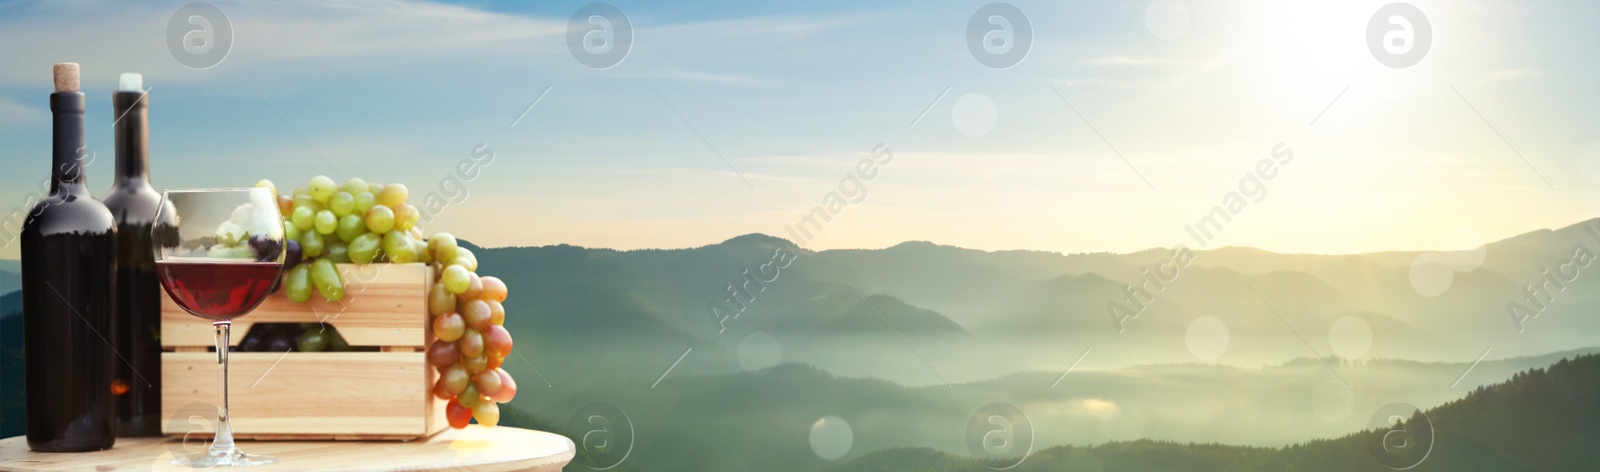 Image of Tasty wine and grapes on wooden table against beautiful mountain landscape, space for text. Banner design